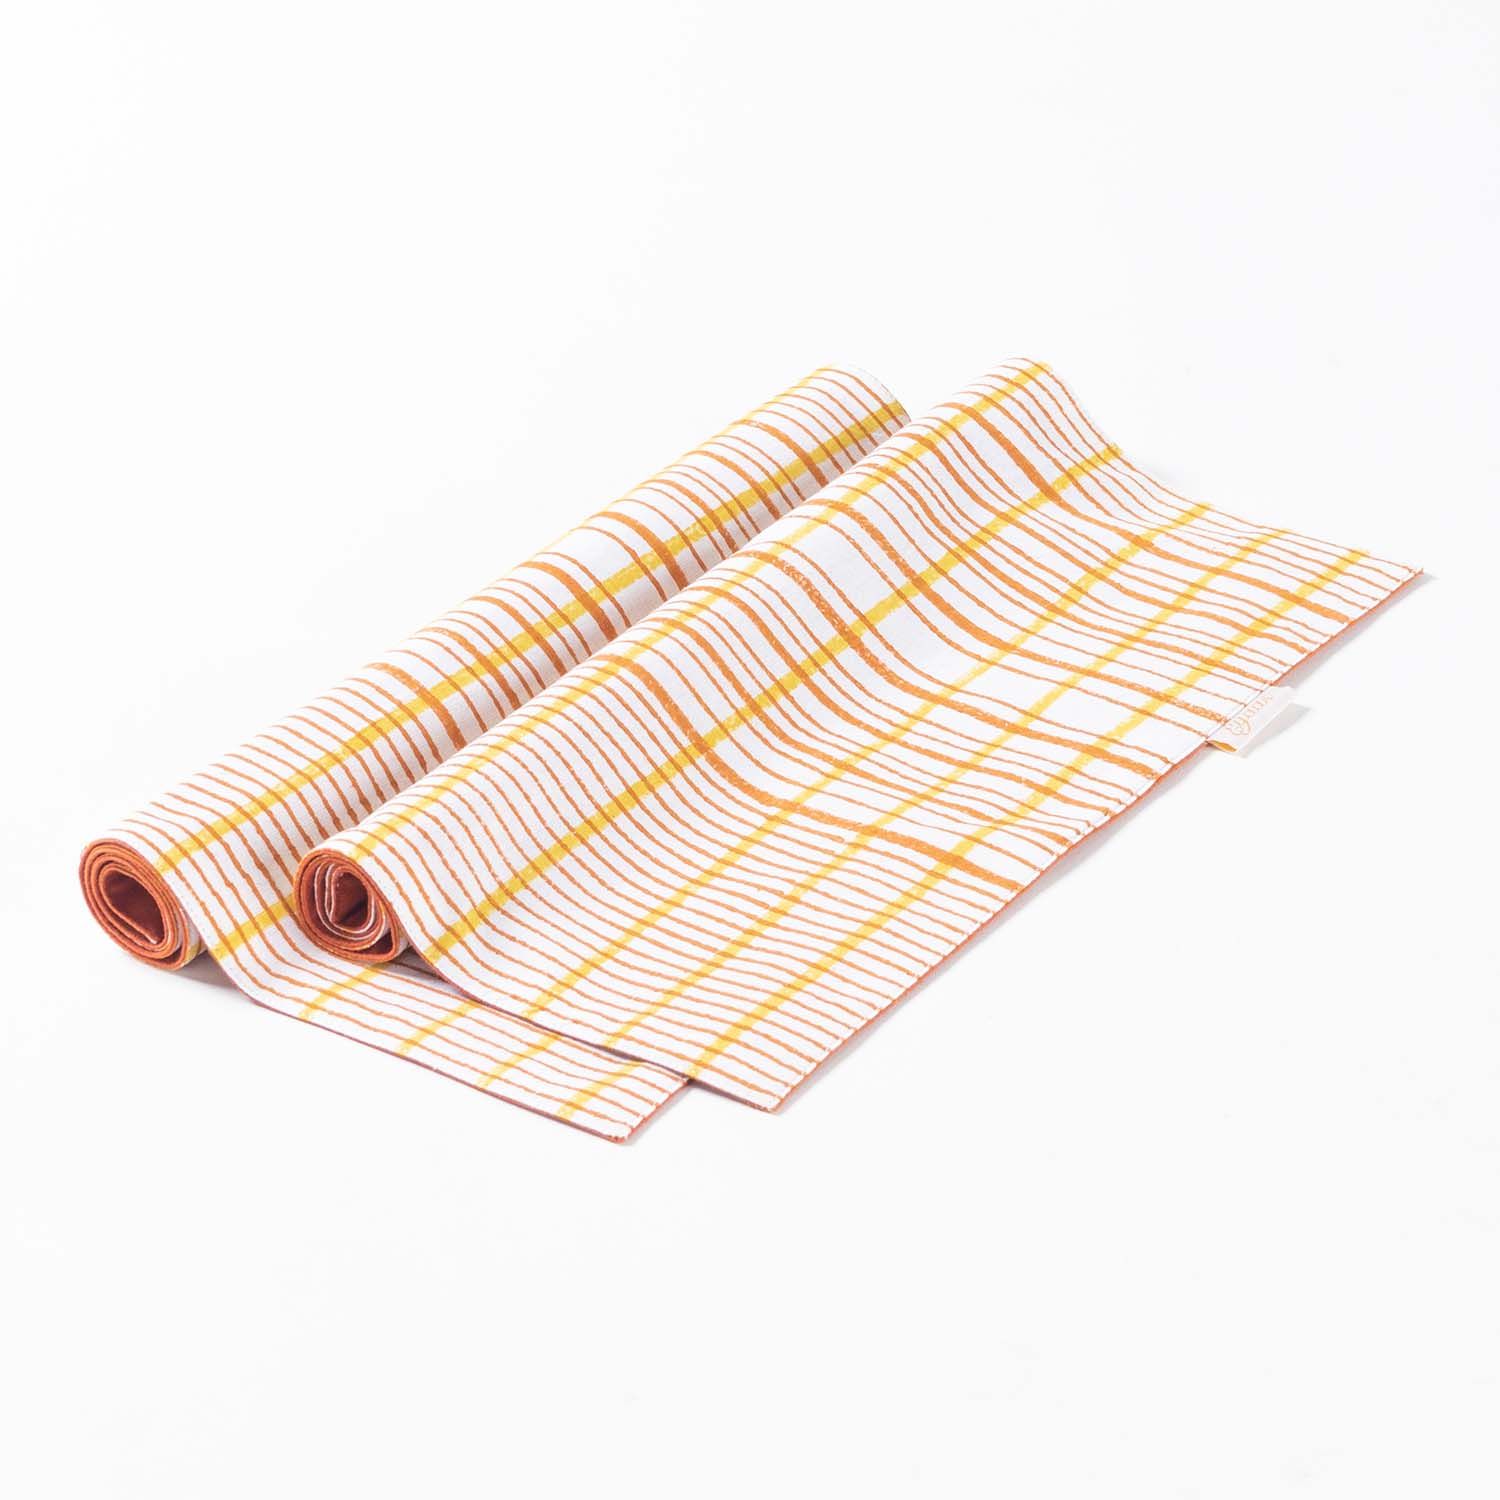 Hand Block Printed Cotton Table Mat in Rust & Mustard - 13x18